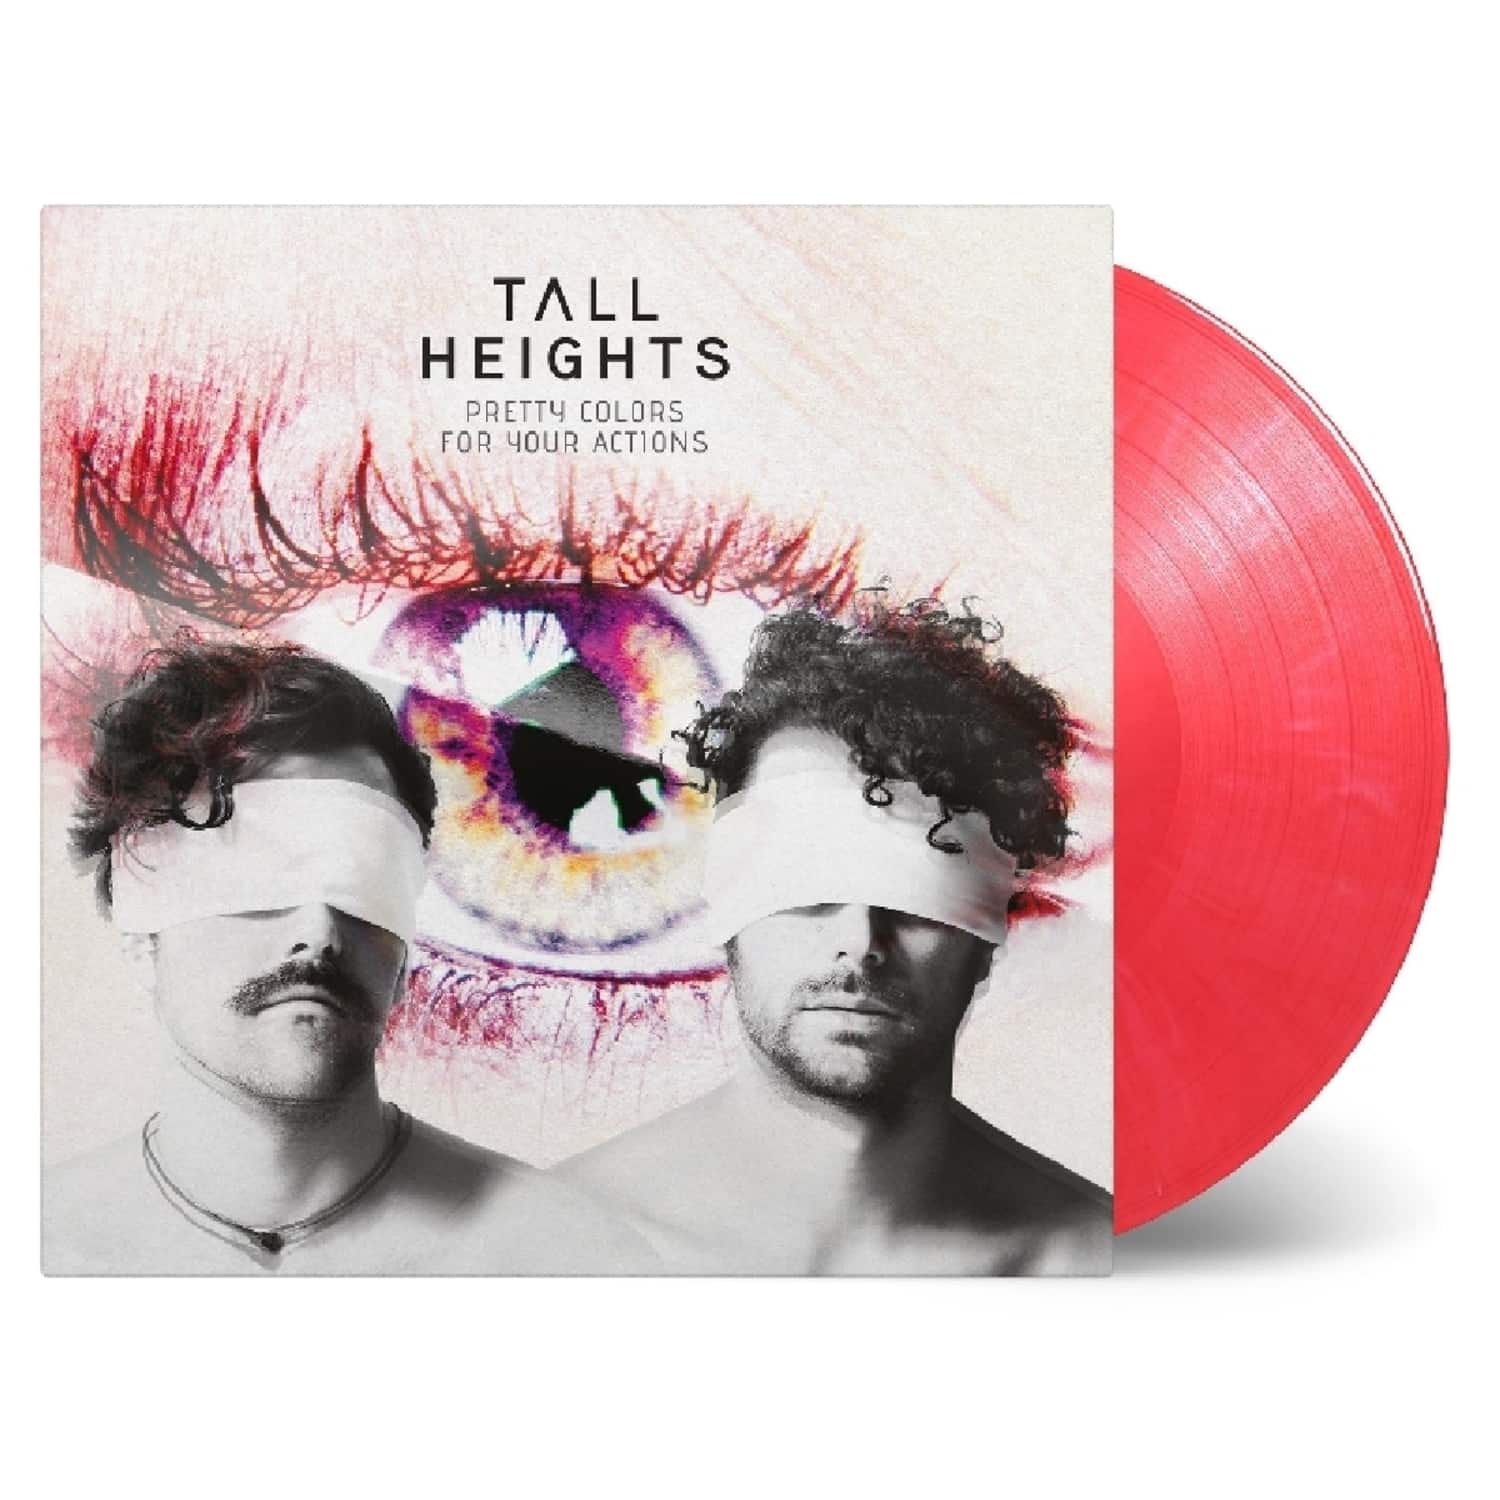 Tall Heights - PRETTY COLORS FOR YOUR ACTIONS 